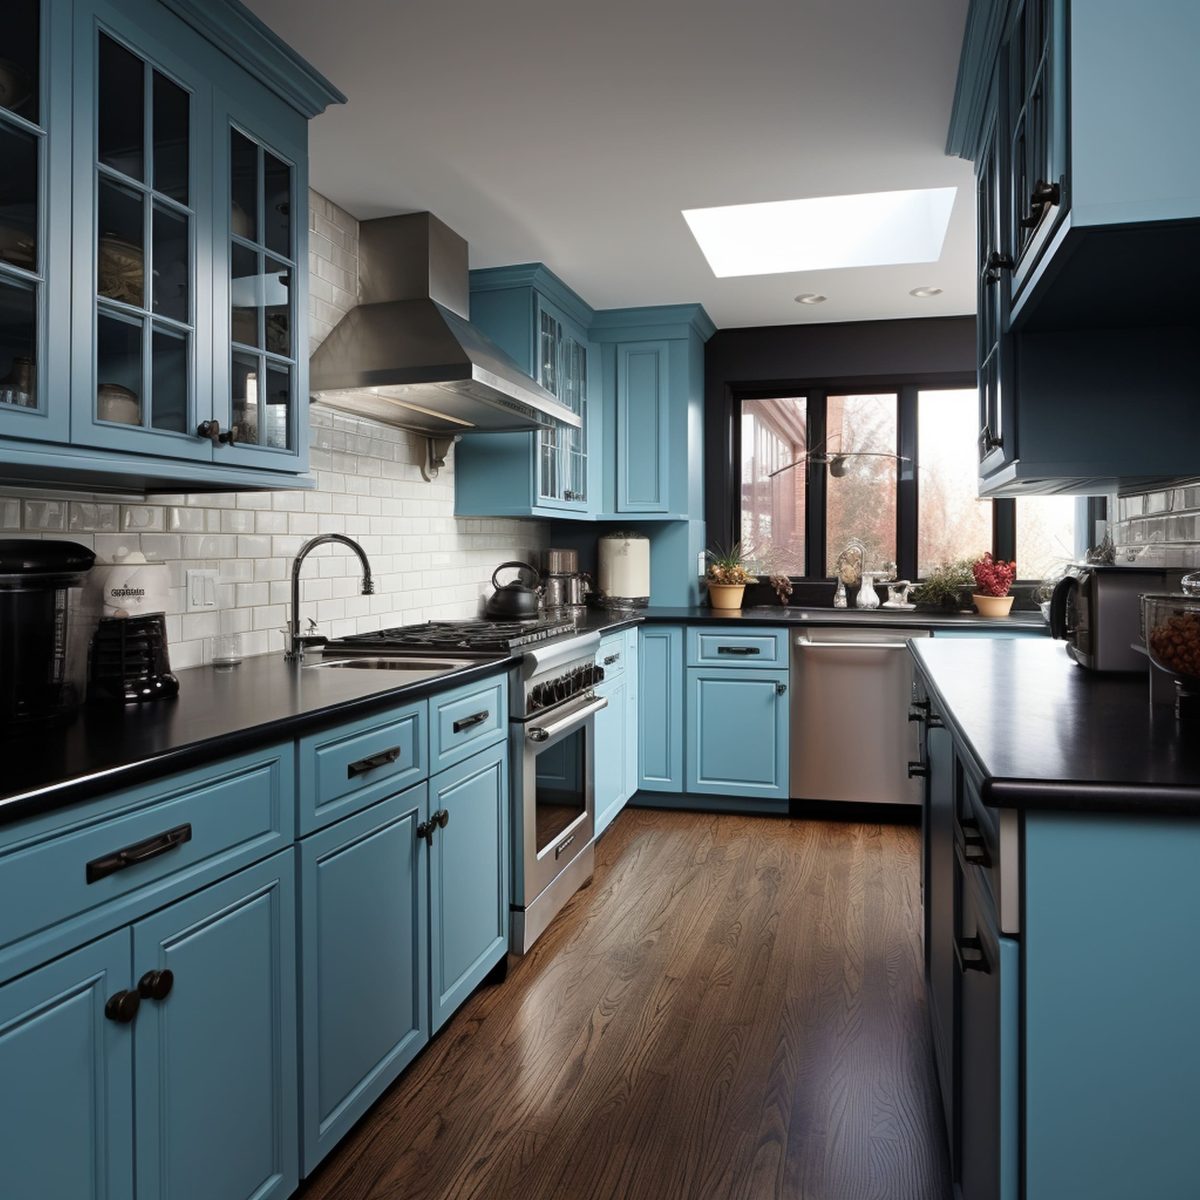 A Kitchen With Black Countertops Light Blue Cabinets and White Subway Tile Backsplash